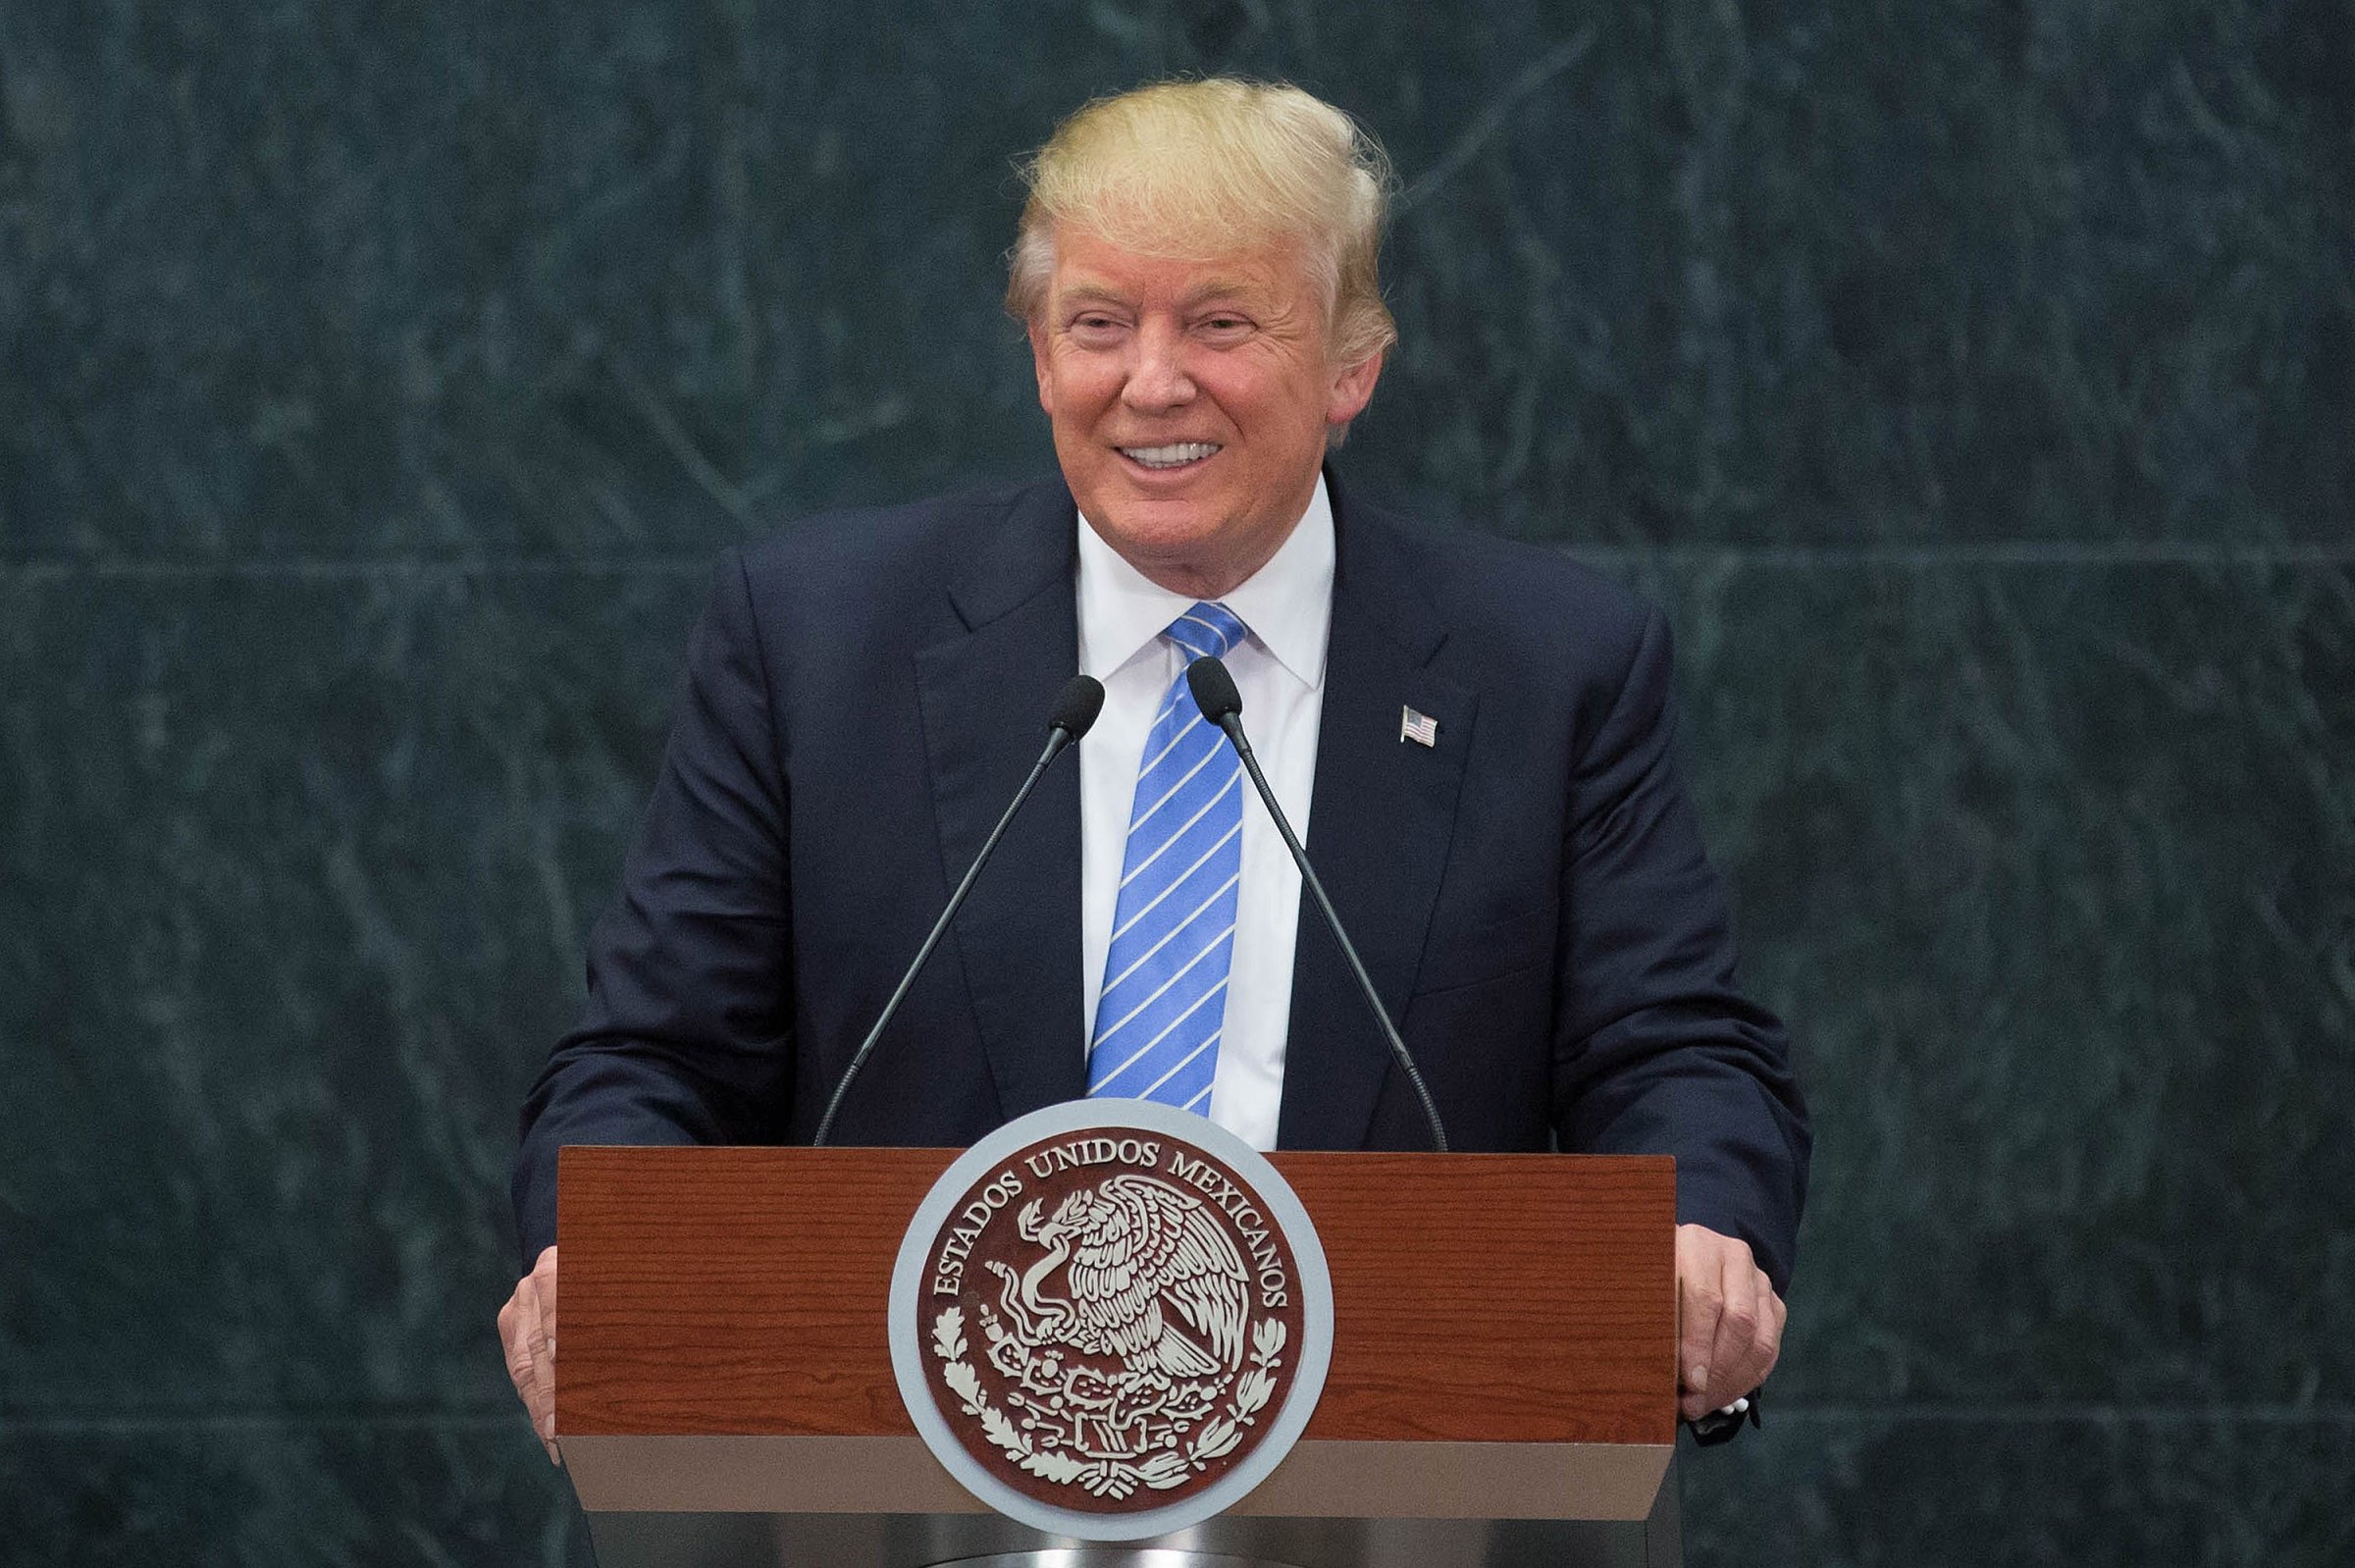 US Republican presidential candidate, Donald Trump speaks during a press conference with President of Mexico Enrique Pena Nieto (not seen) at Los Pinos presidential residence, in Mexico City, Mexico on August 31, 2016.